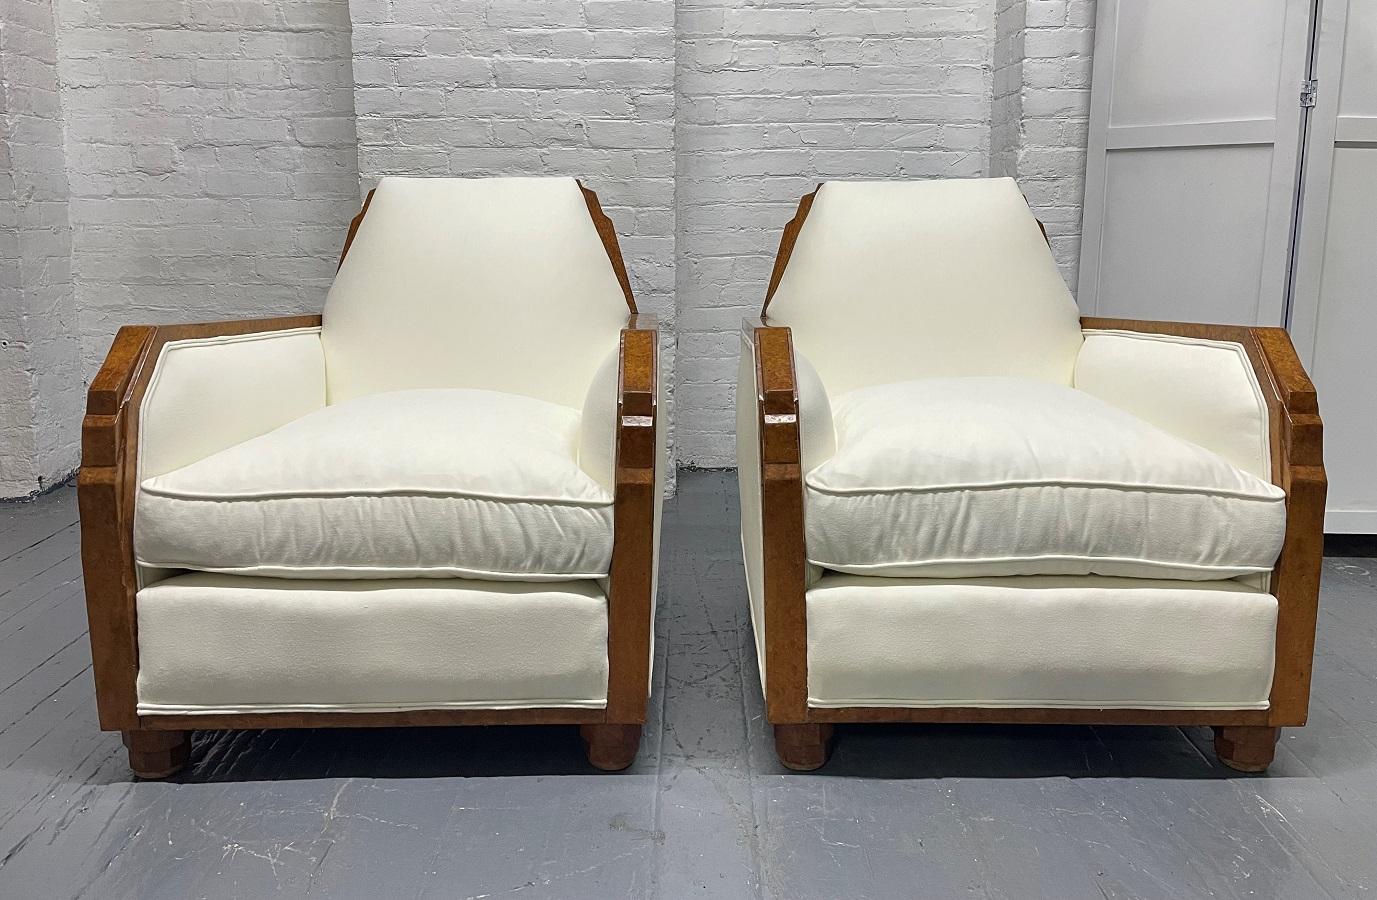 Pair of 1940s French Art Deco lounge or club chairs. The chairs have an Amboyna wood frame and are nicely upholstered. 




  